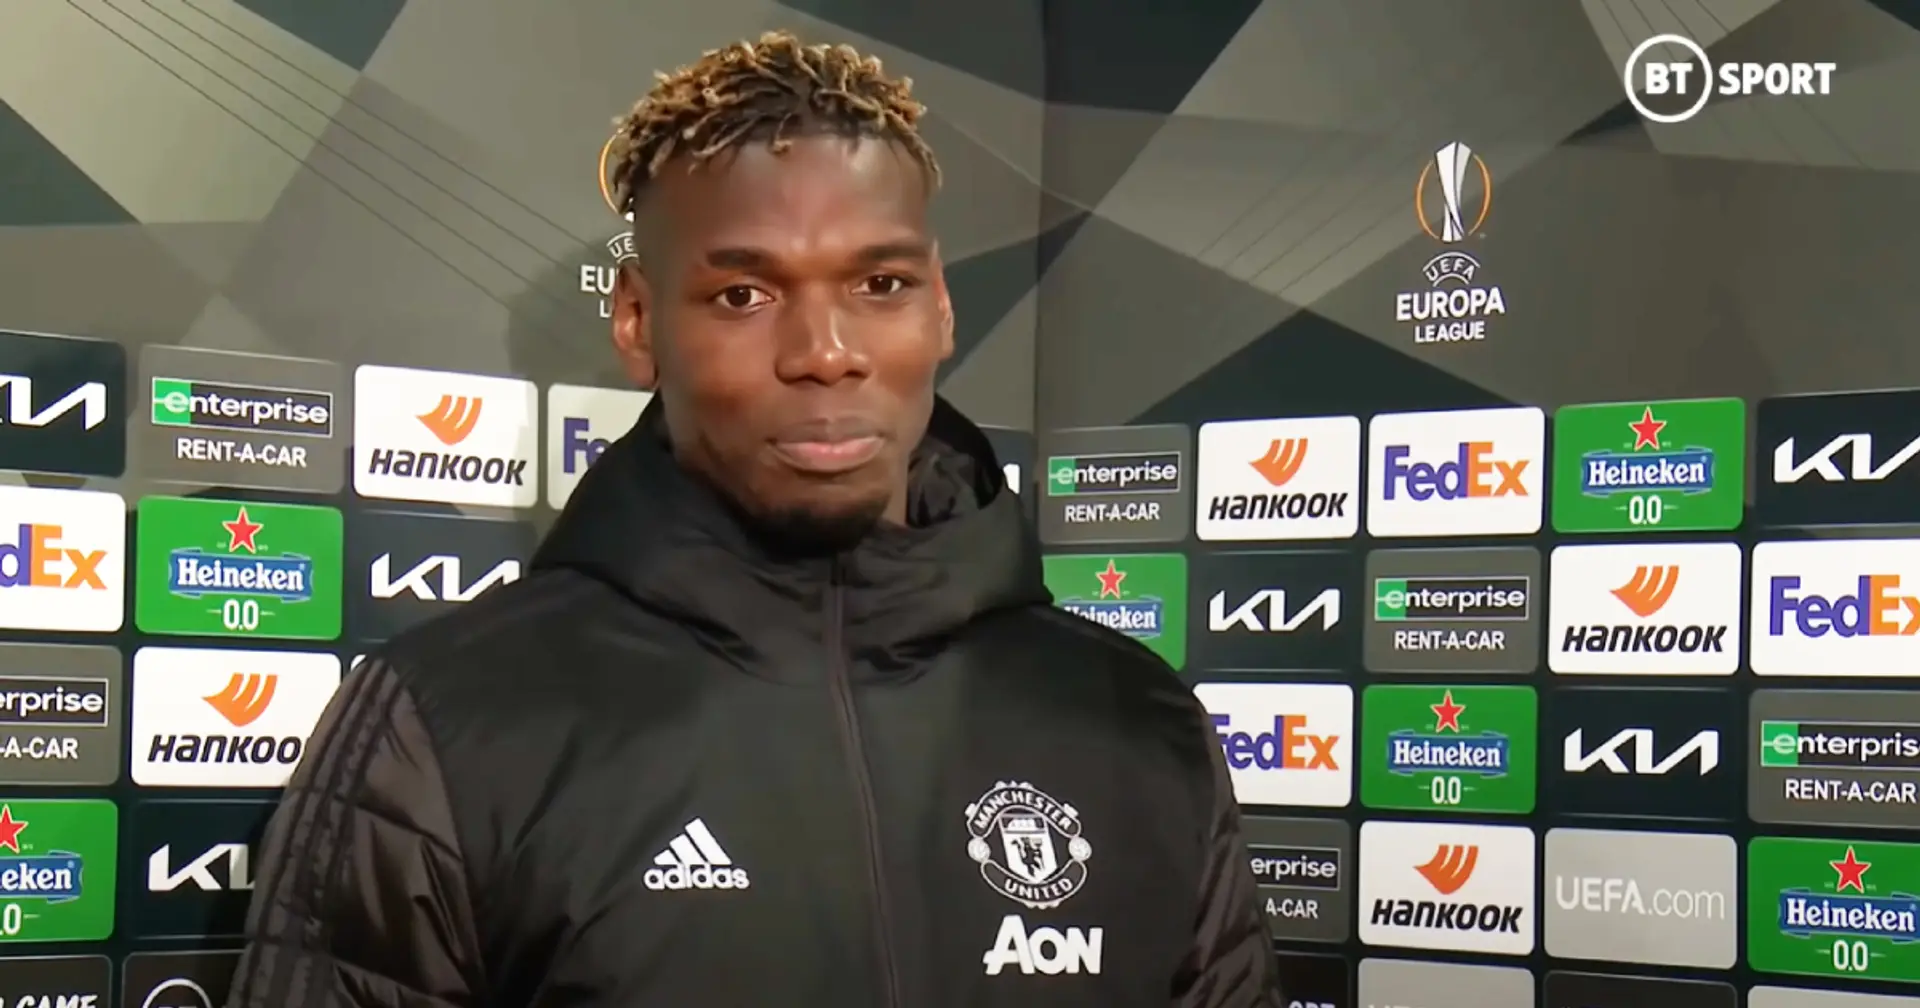 'You can’t win alone': Paul Pogba opens up on being a leader at Man United